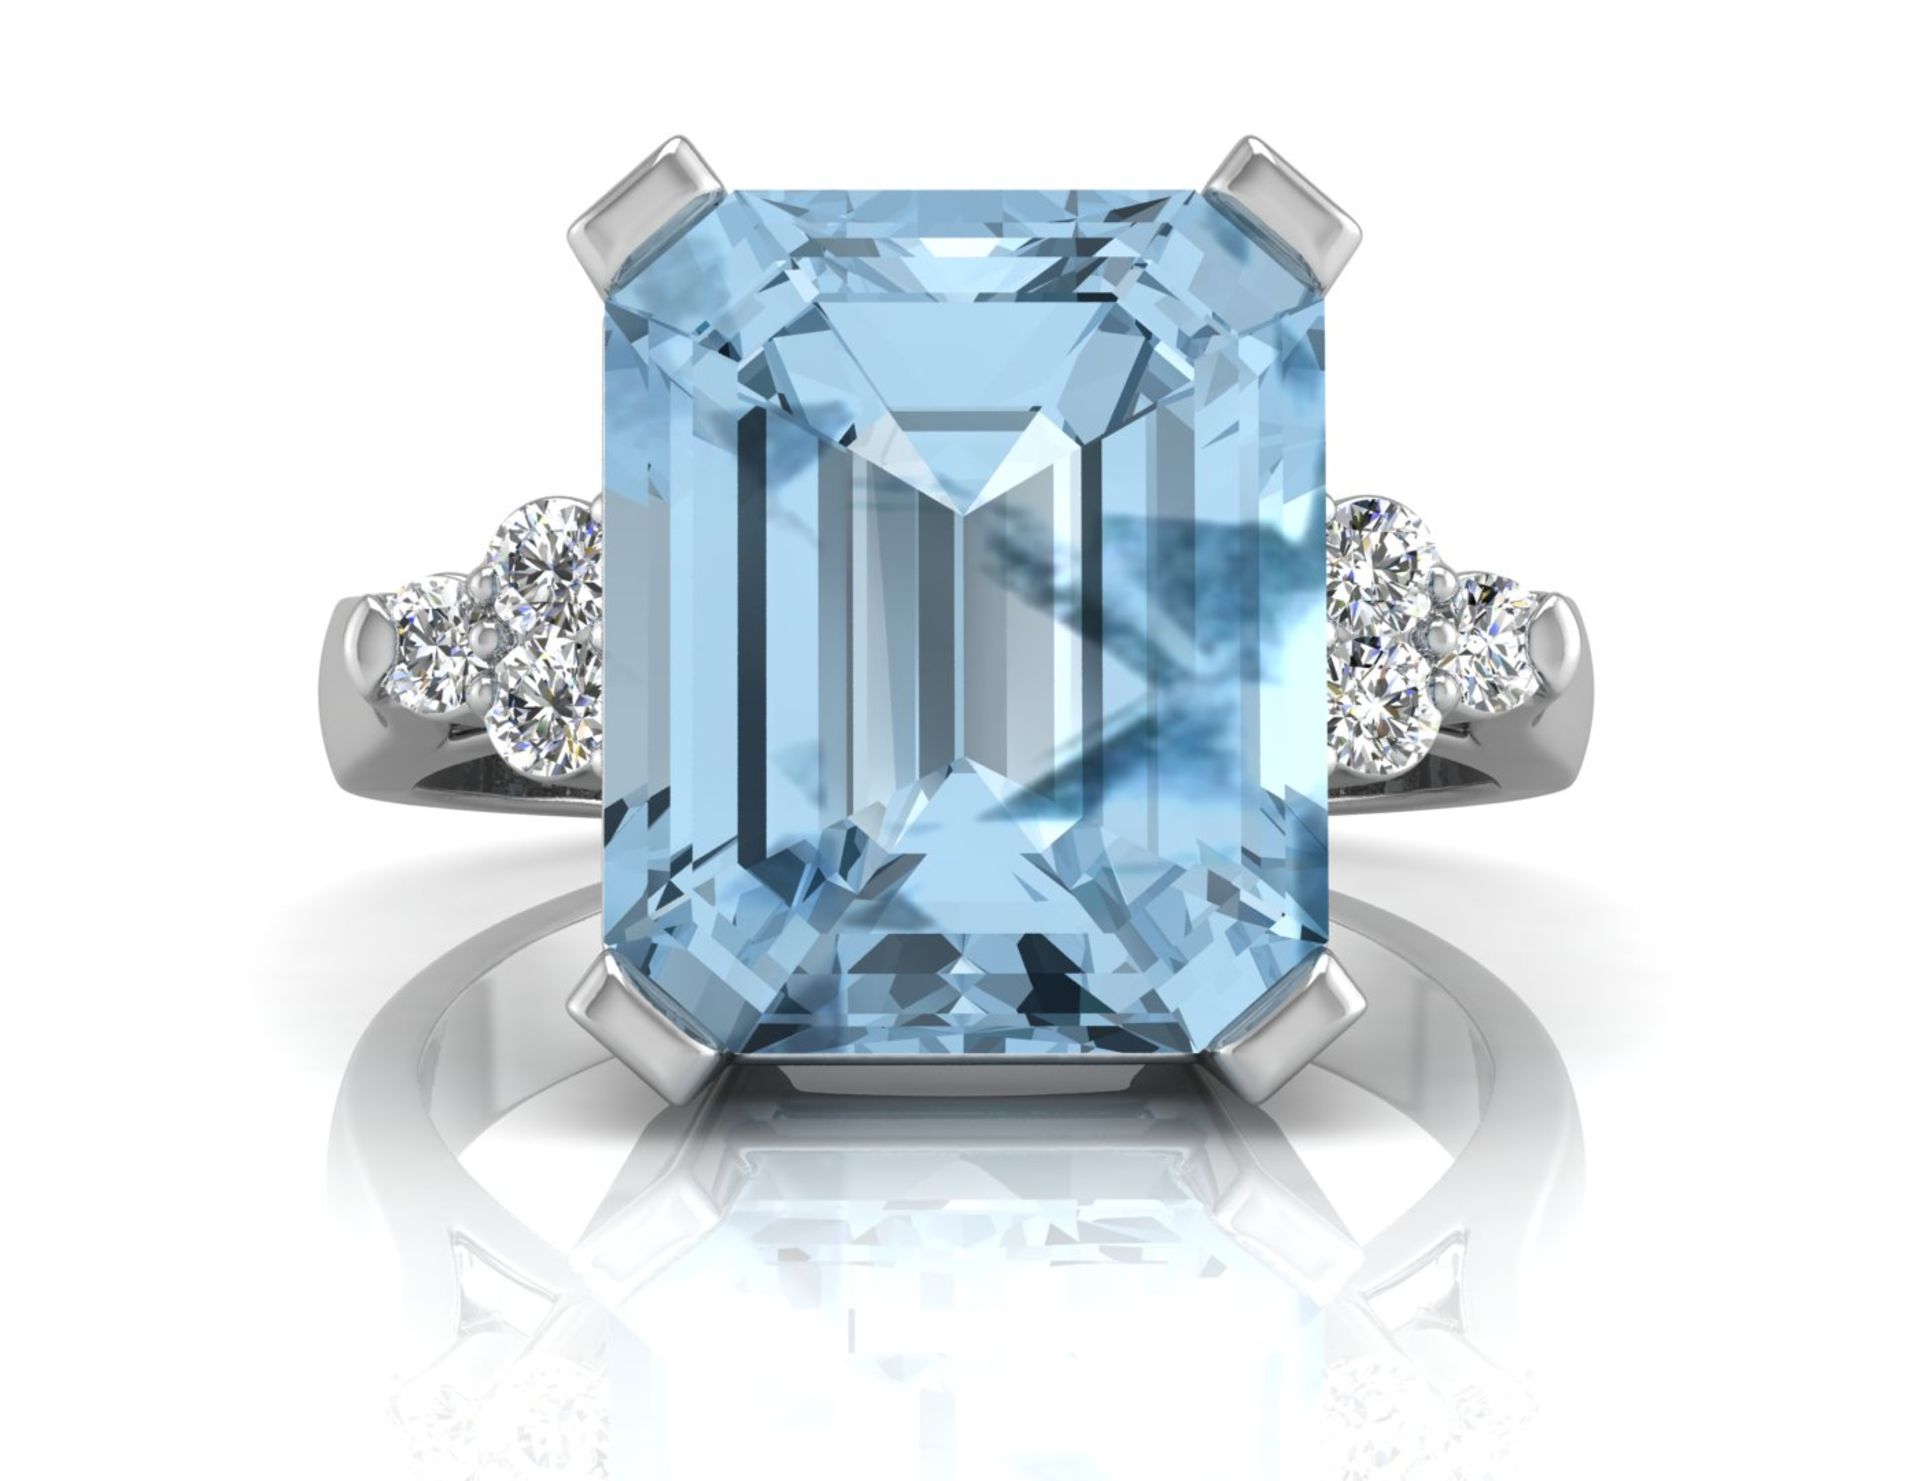 9ct White Gold Diamond And Blue Topaz Ring - Image 4 of 5